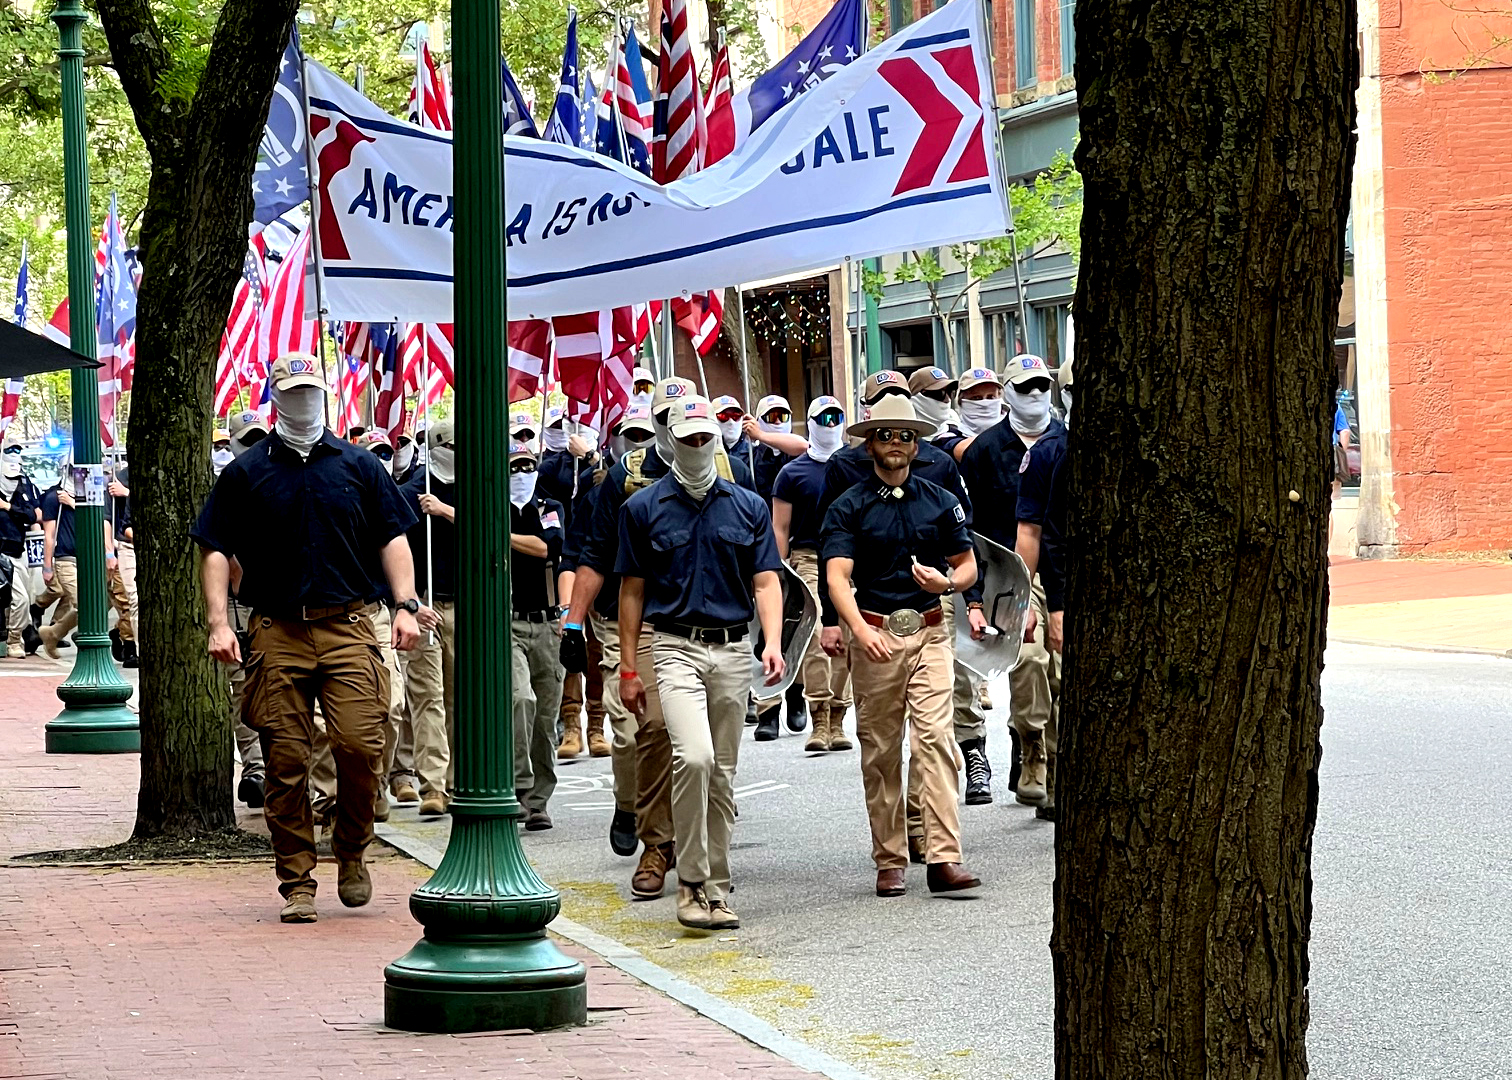 Several white men are shown dressed in navy shirts and khakis. The men wear ball caps and white face masks to hide their faces. They hold upside down American flags and march down a street during the daytime.